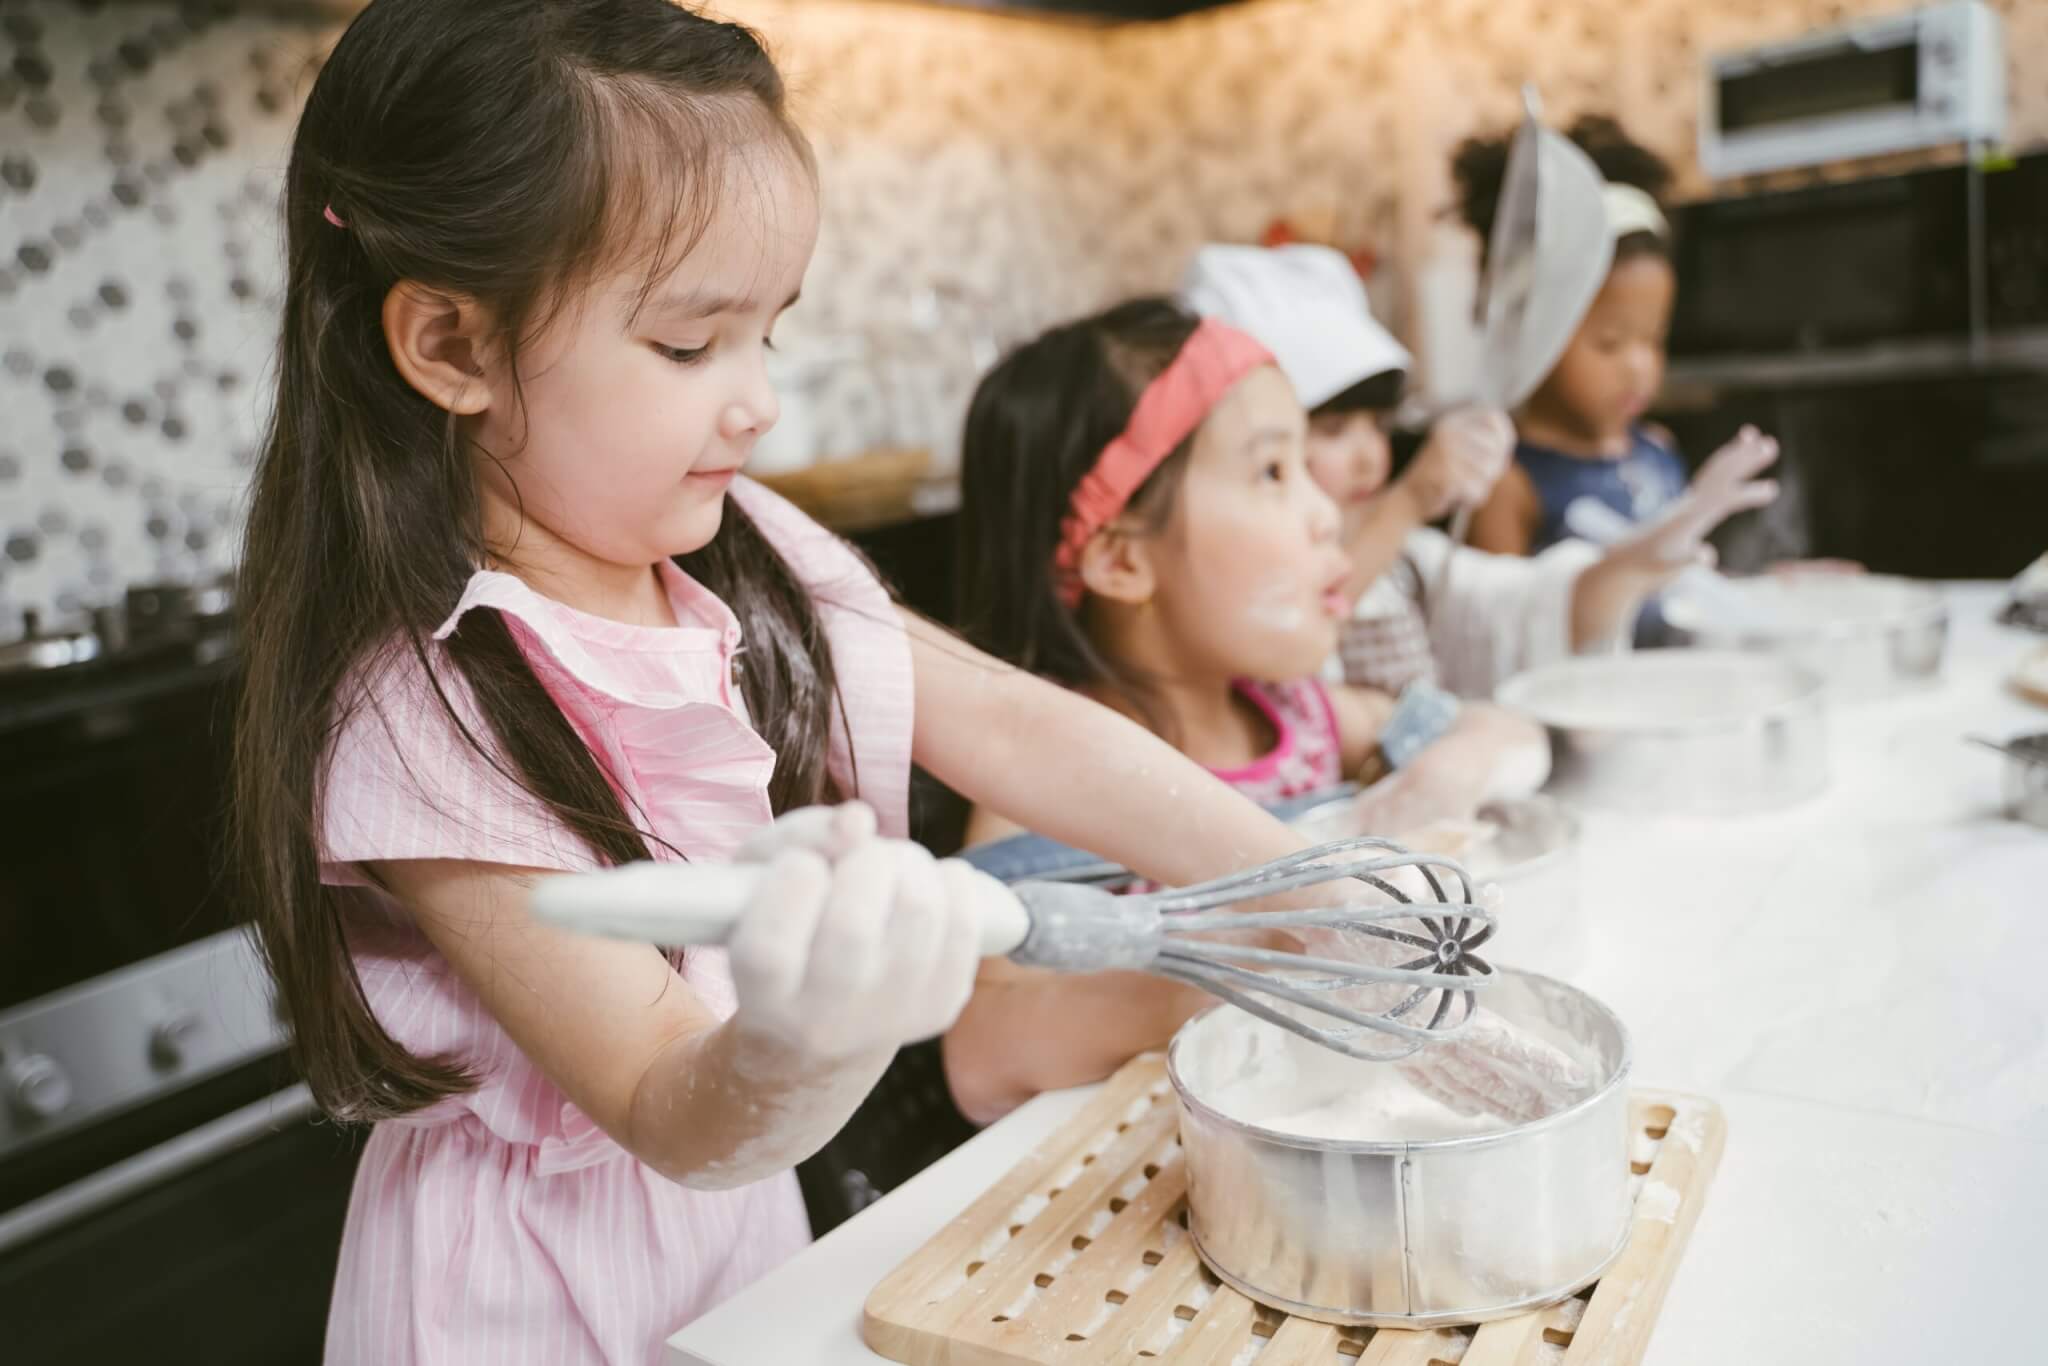 Young children cooking and baking